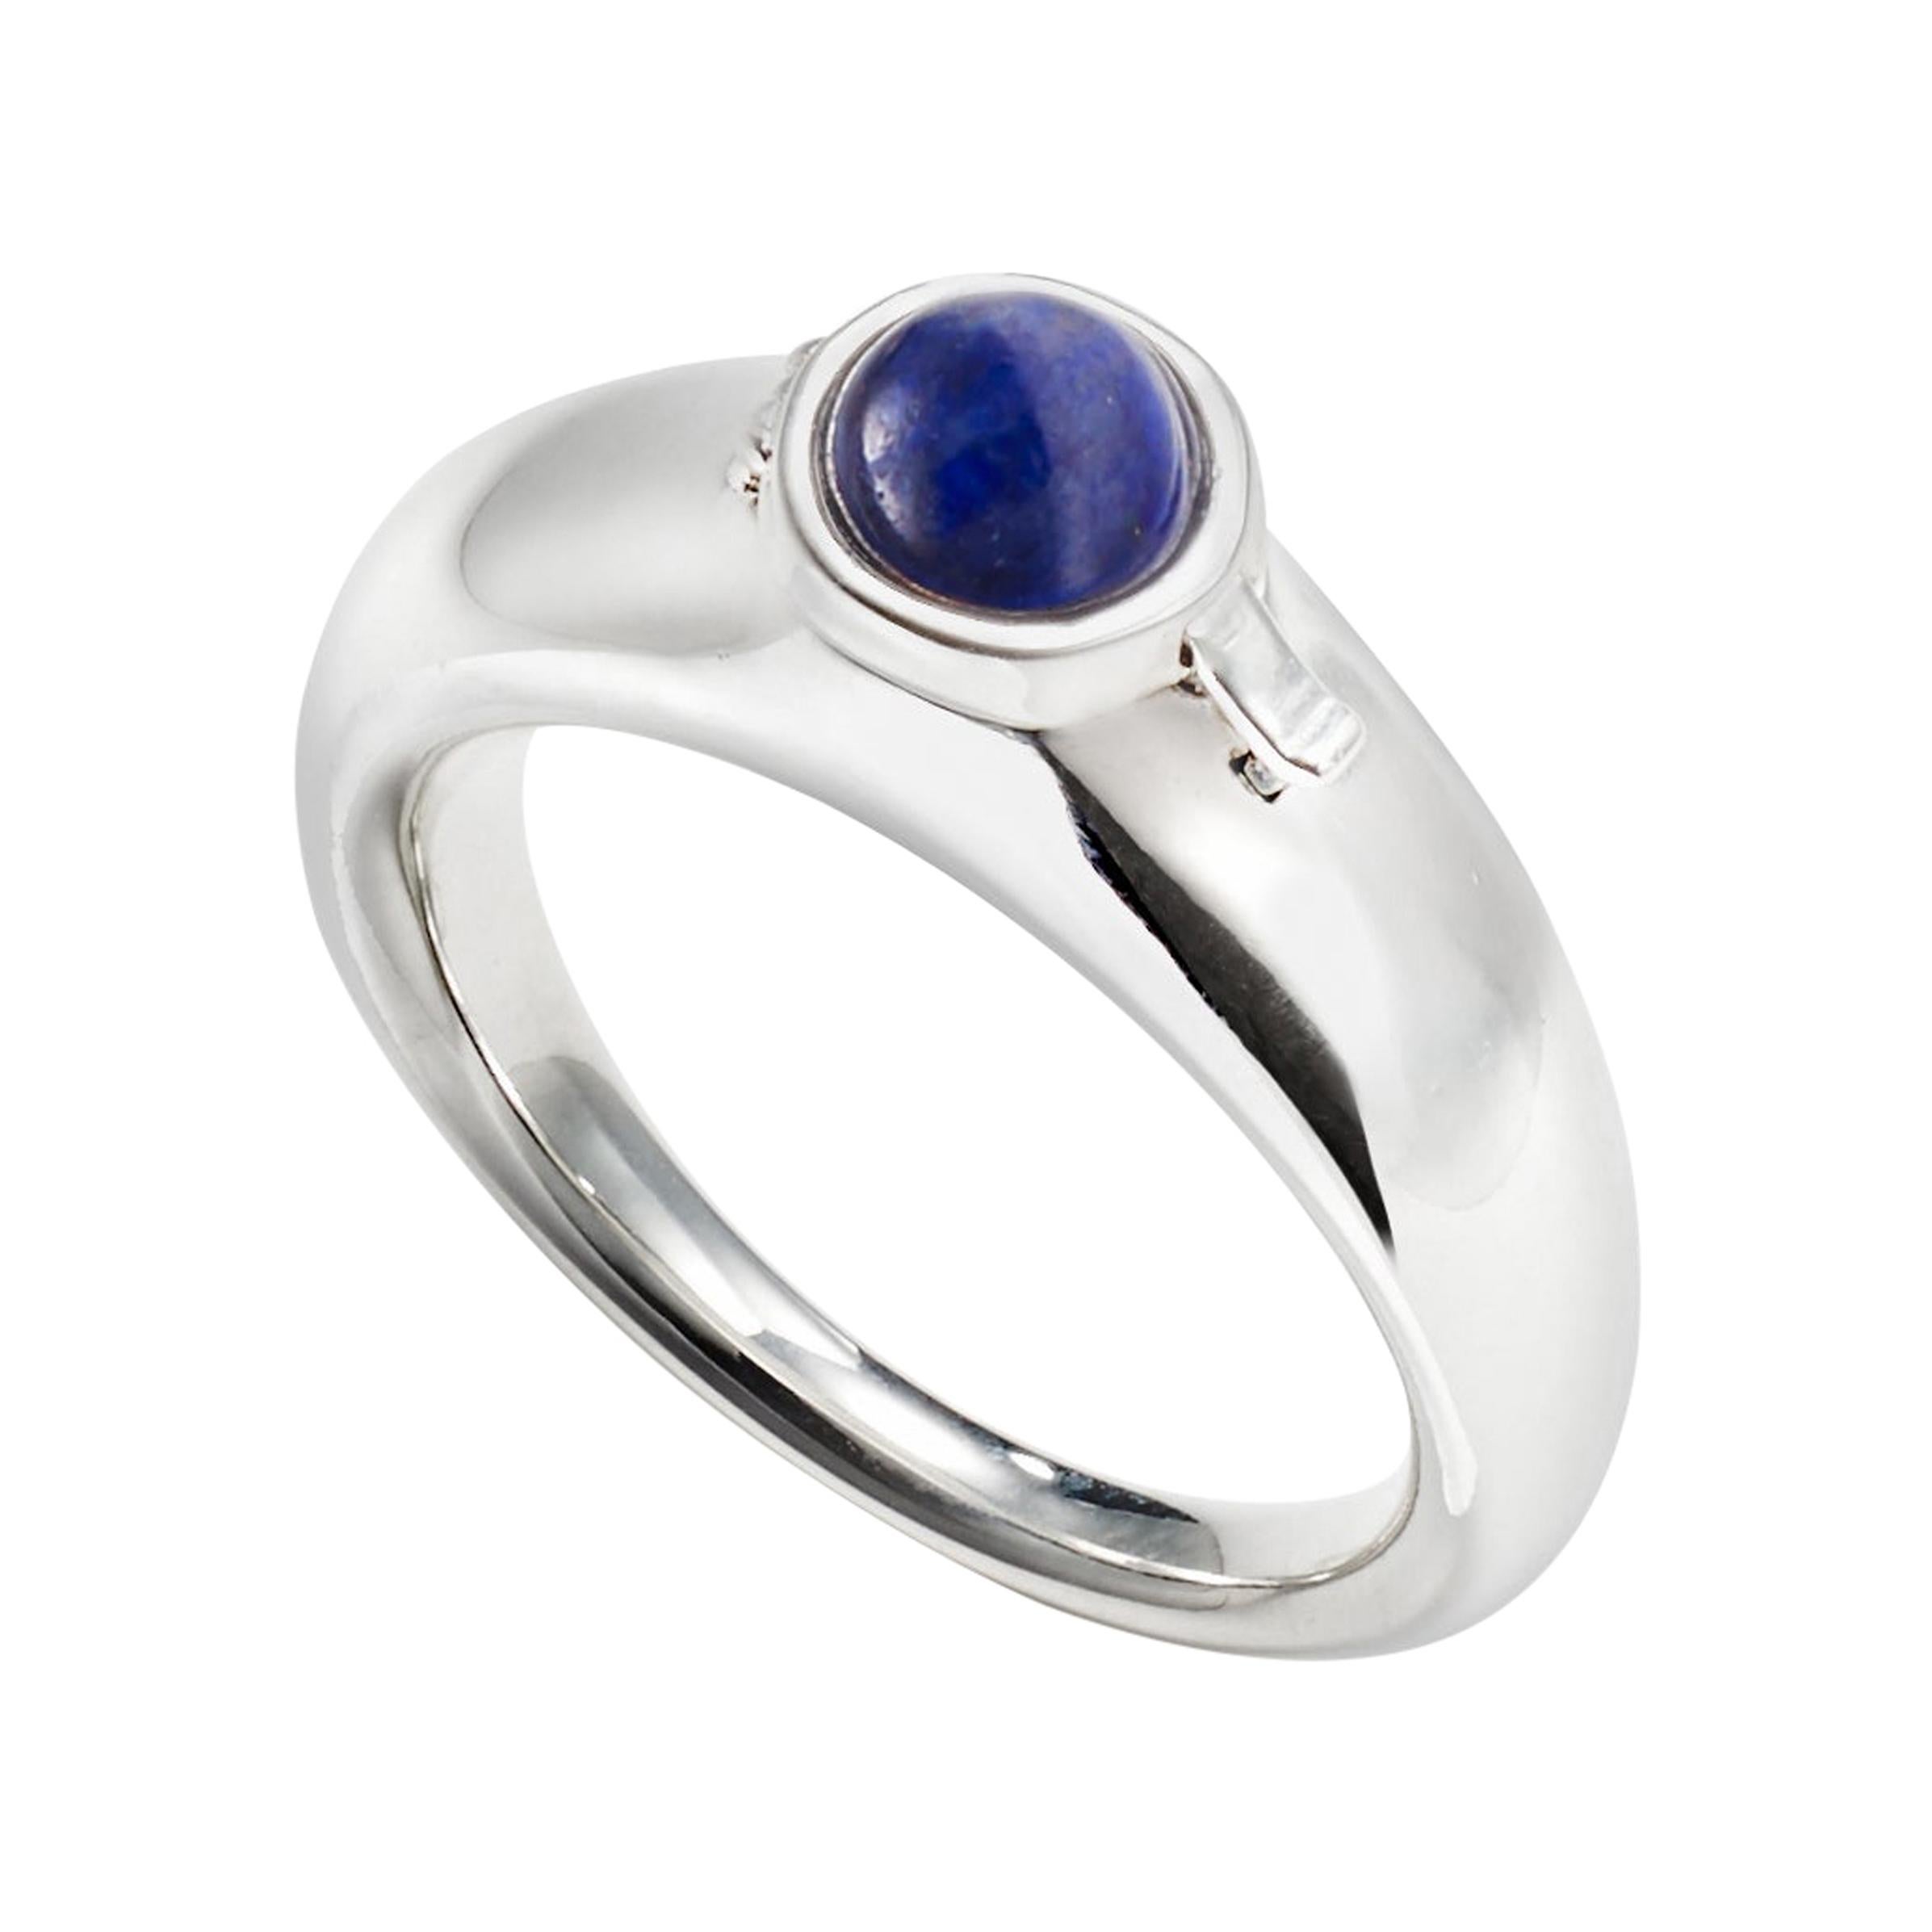 For Sale:  AGMES Sterling Silver Locket Ring with Lapis Stone